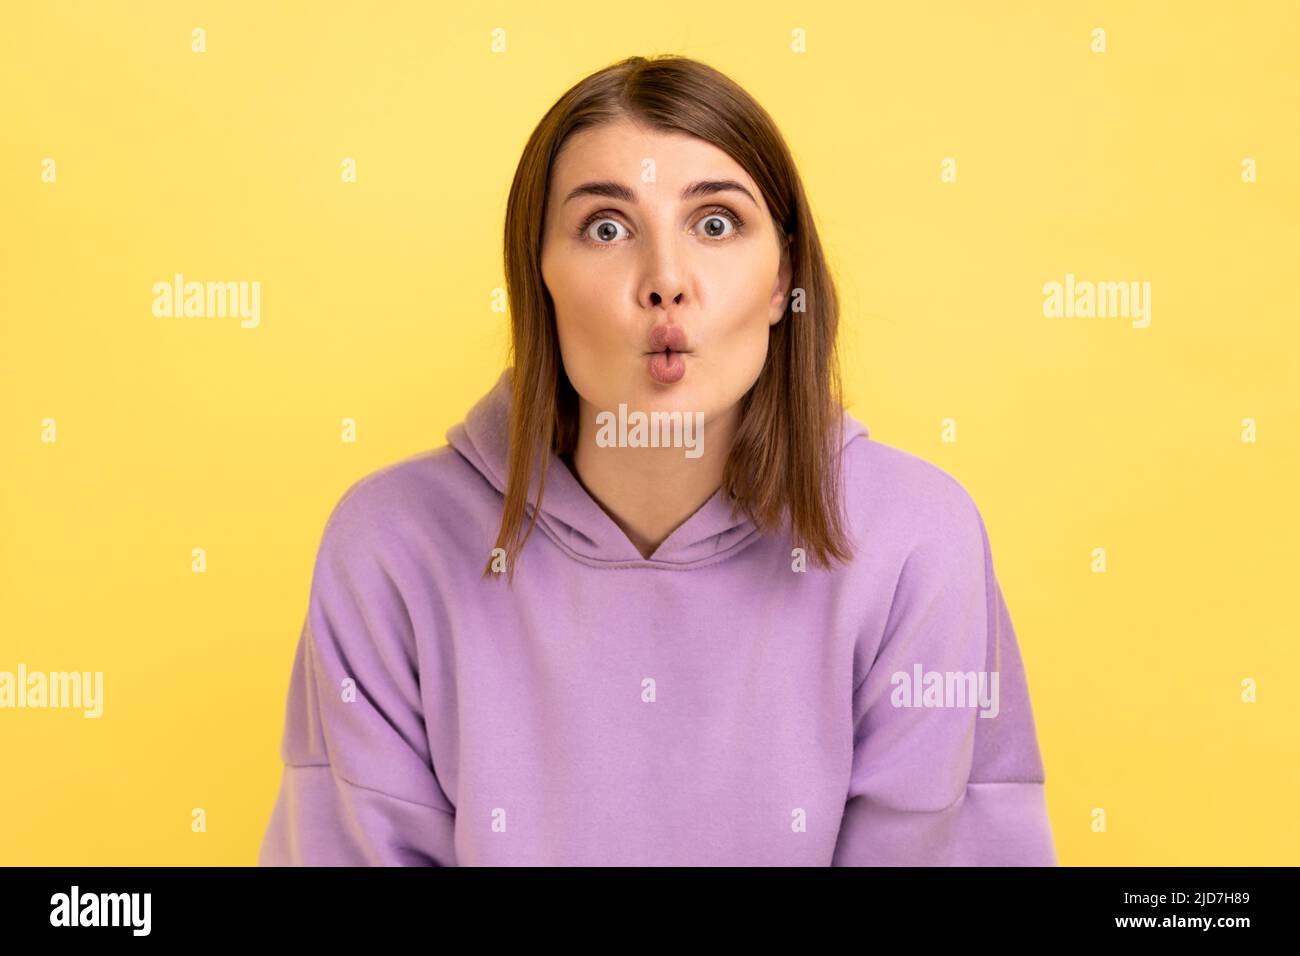 Portrait of cute funny woman expressing amazement with fish face grimace, pout lips and big eyes, looking shocked and comical, wearing purple hoodie. Indoor studio shot isolated on yellow background. Stock Photo